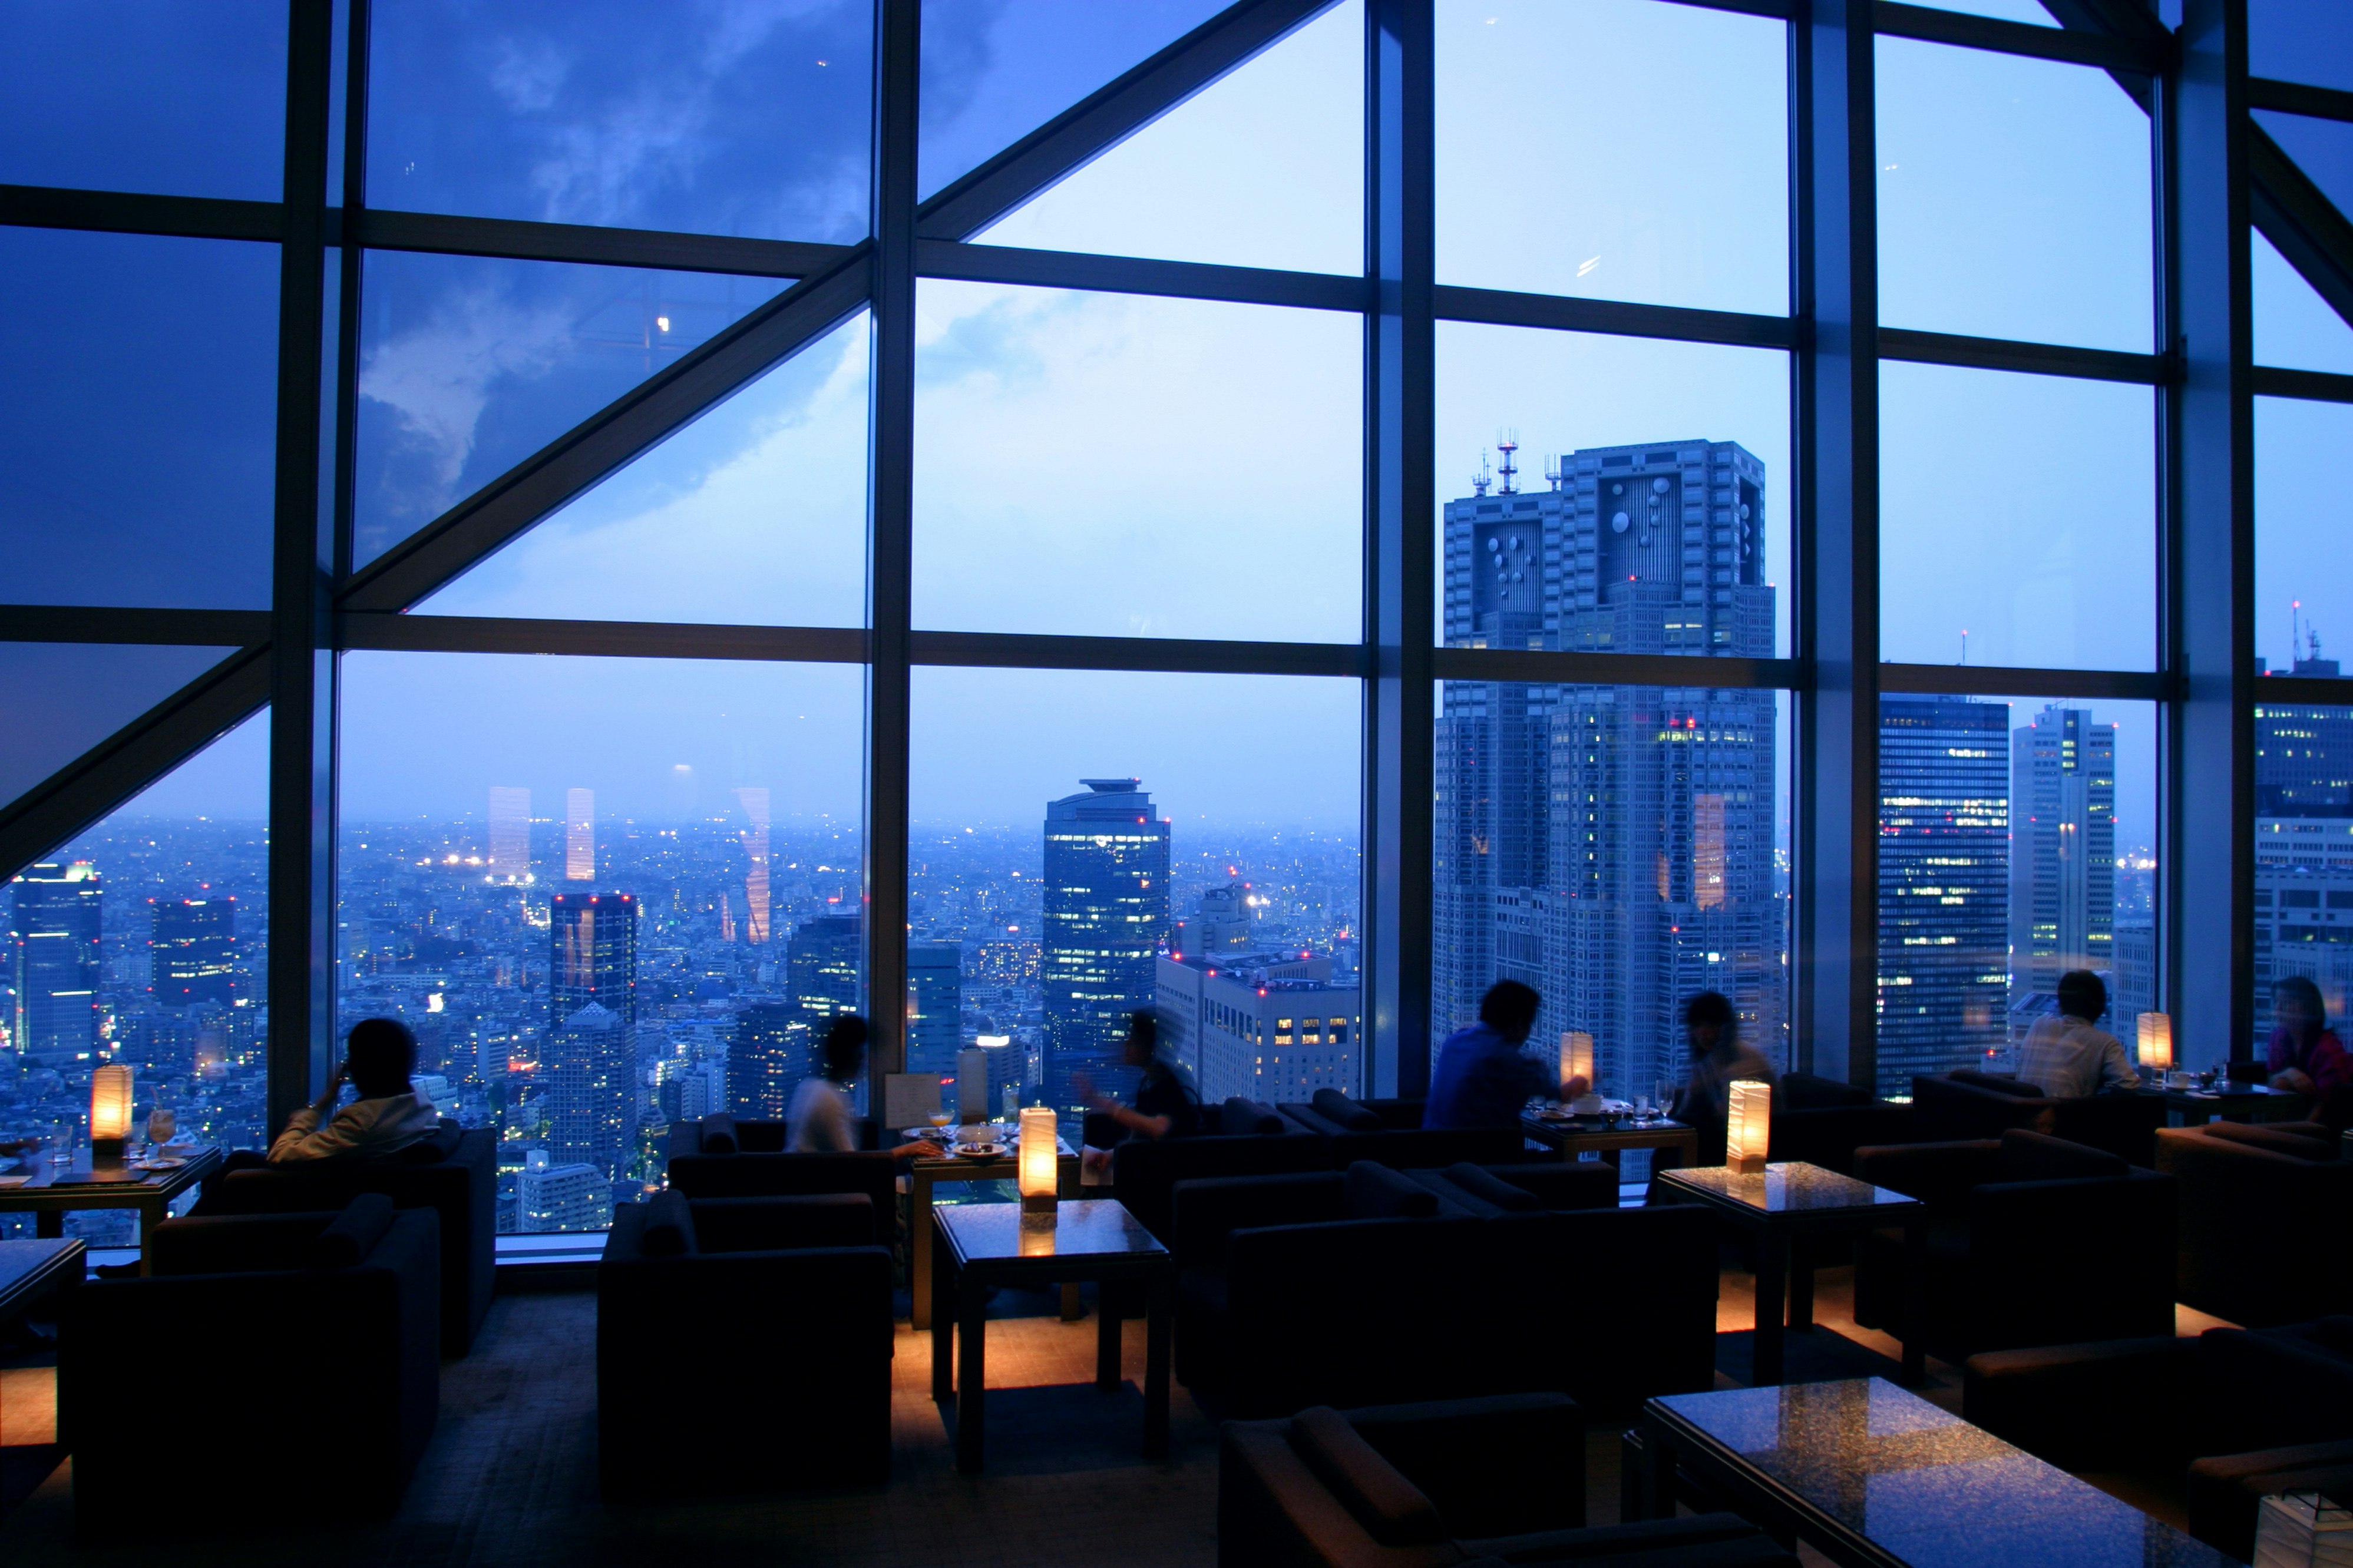 The skyline of Kanto district in Tokyo is bathed in twilight denim blues punctuated by white and red lights from the skyscrapers in view. A wall of windows divided into squares and triangles by large steel girders separates a few diners at small tables with easy chairs and rectangular lanterns from the view outside.